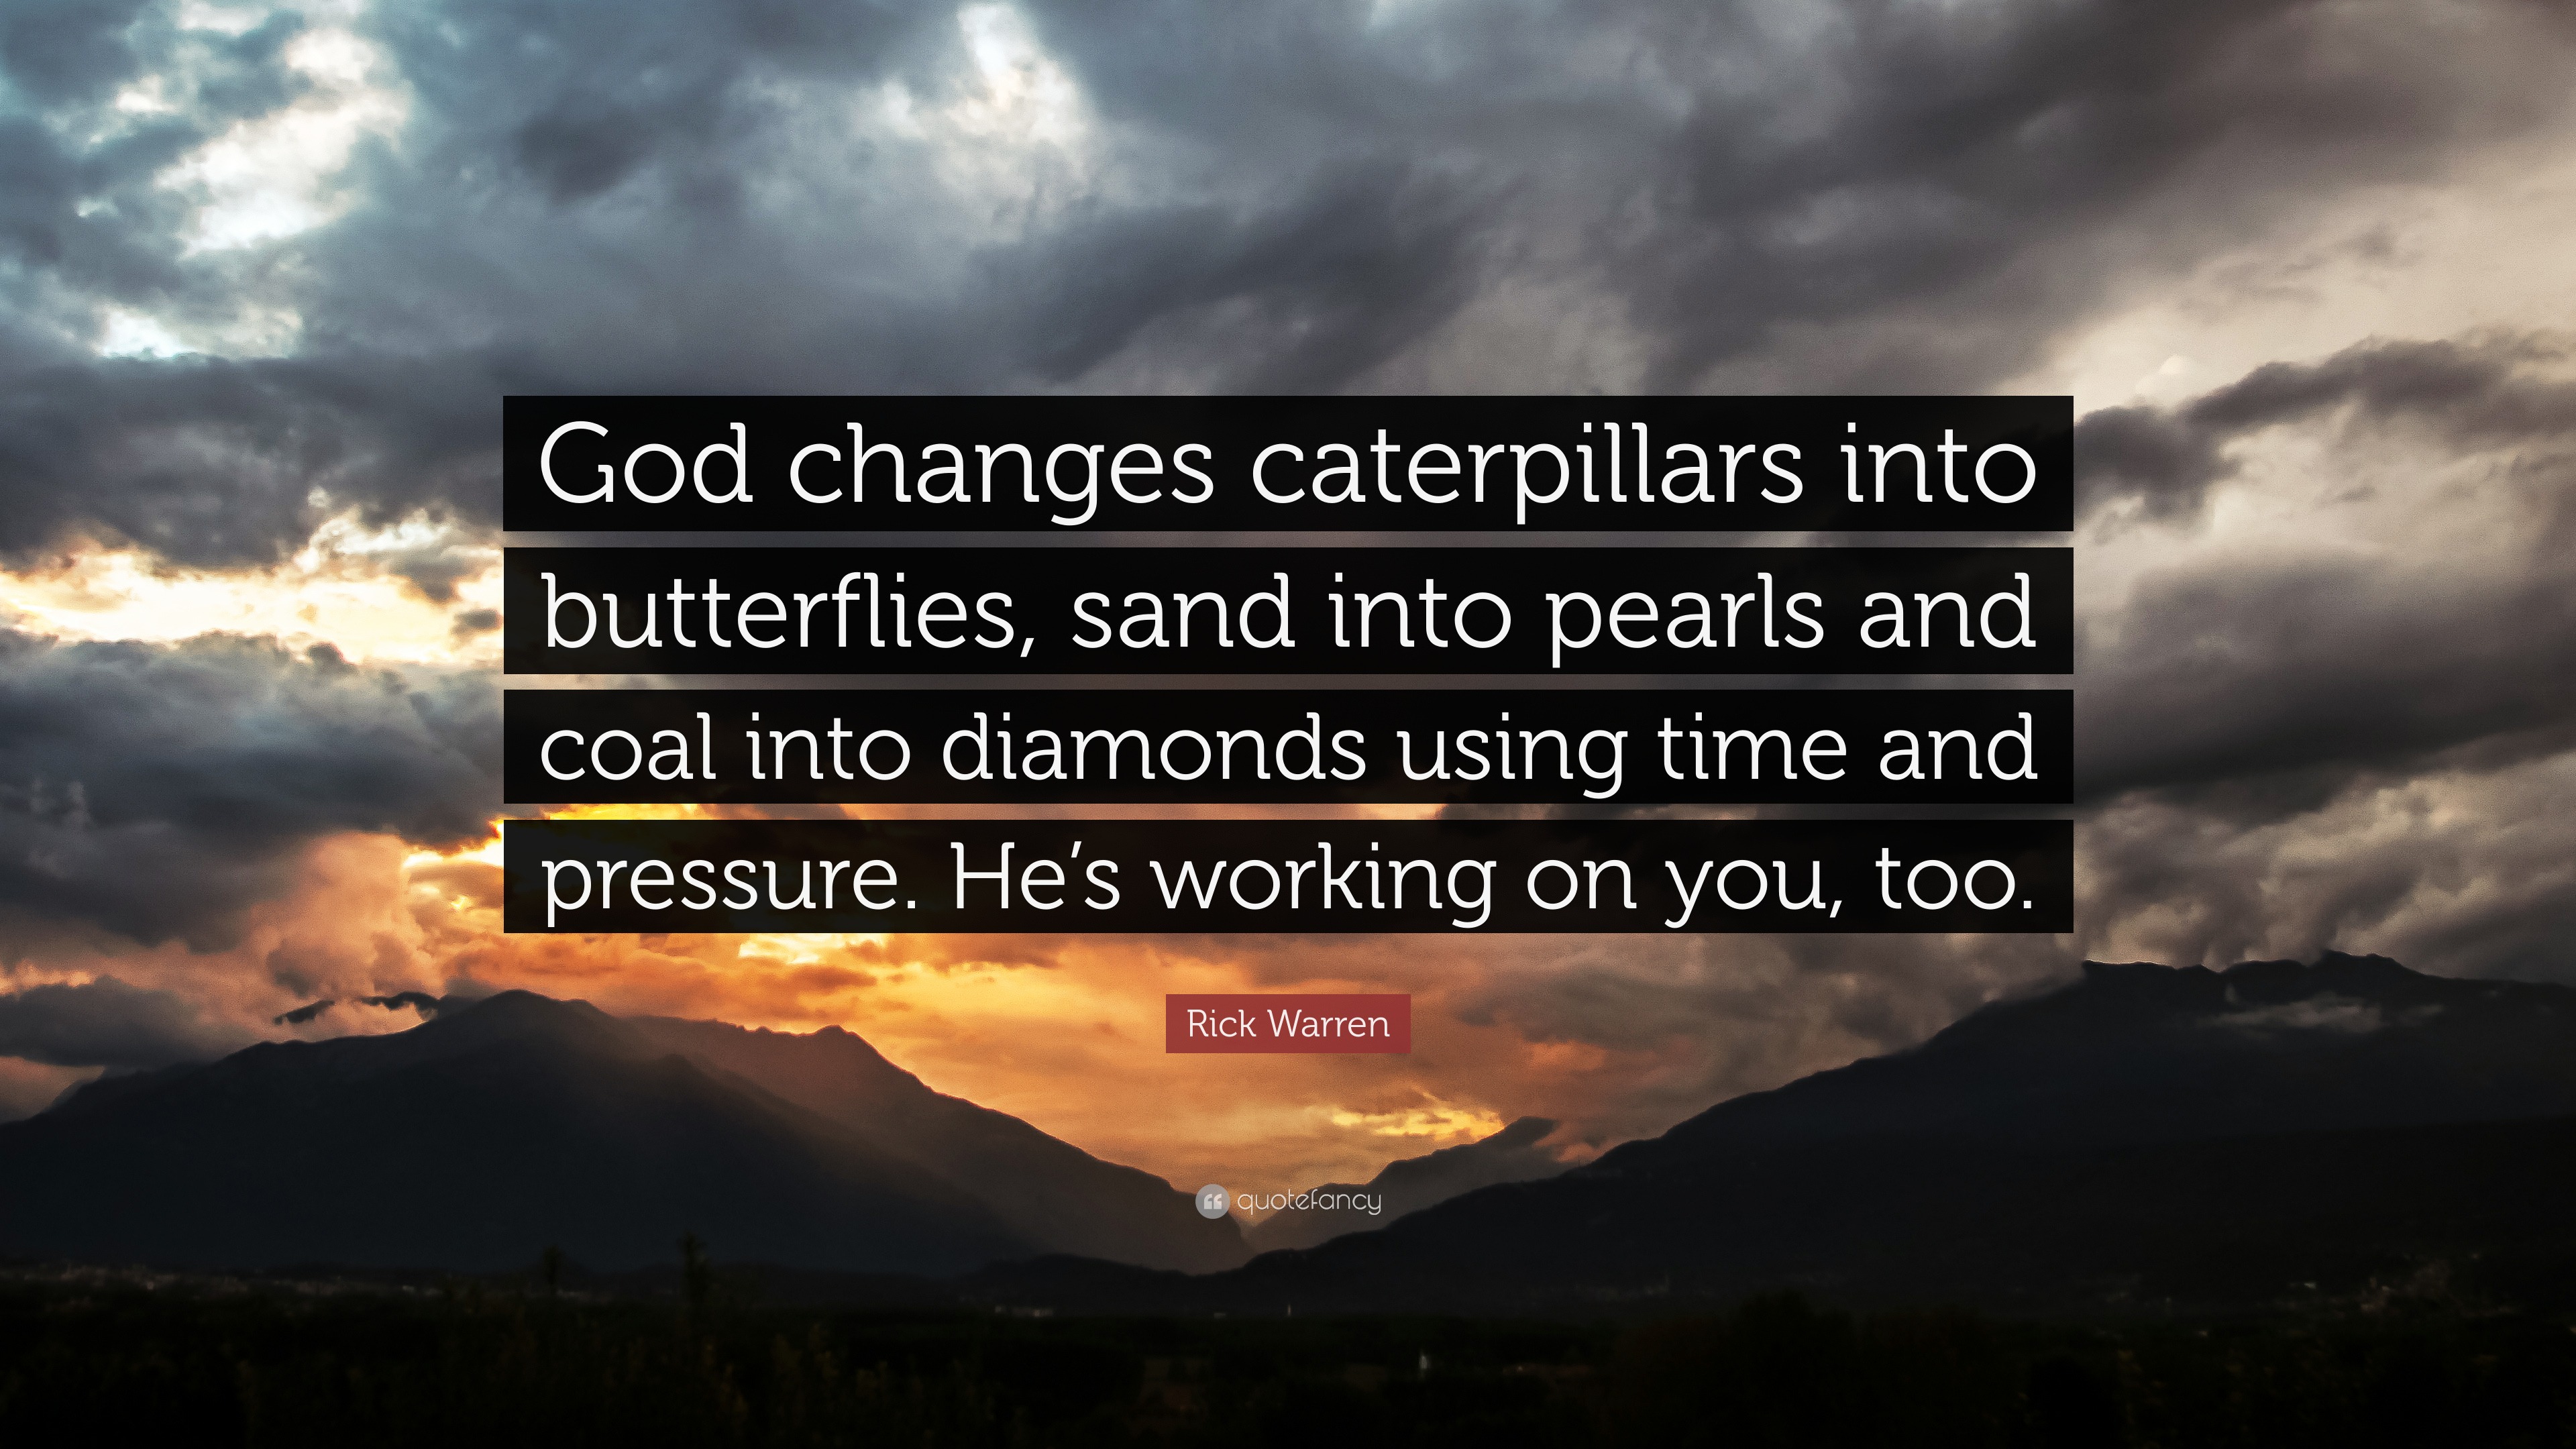 Rick Warren Quote: "God changes caterpillars into butterflies, sand into pearls and coal into ...